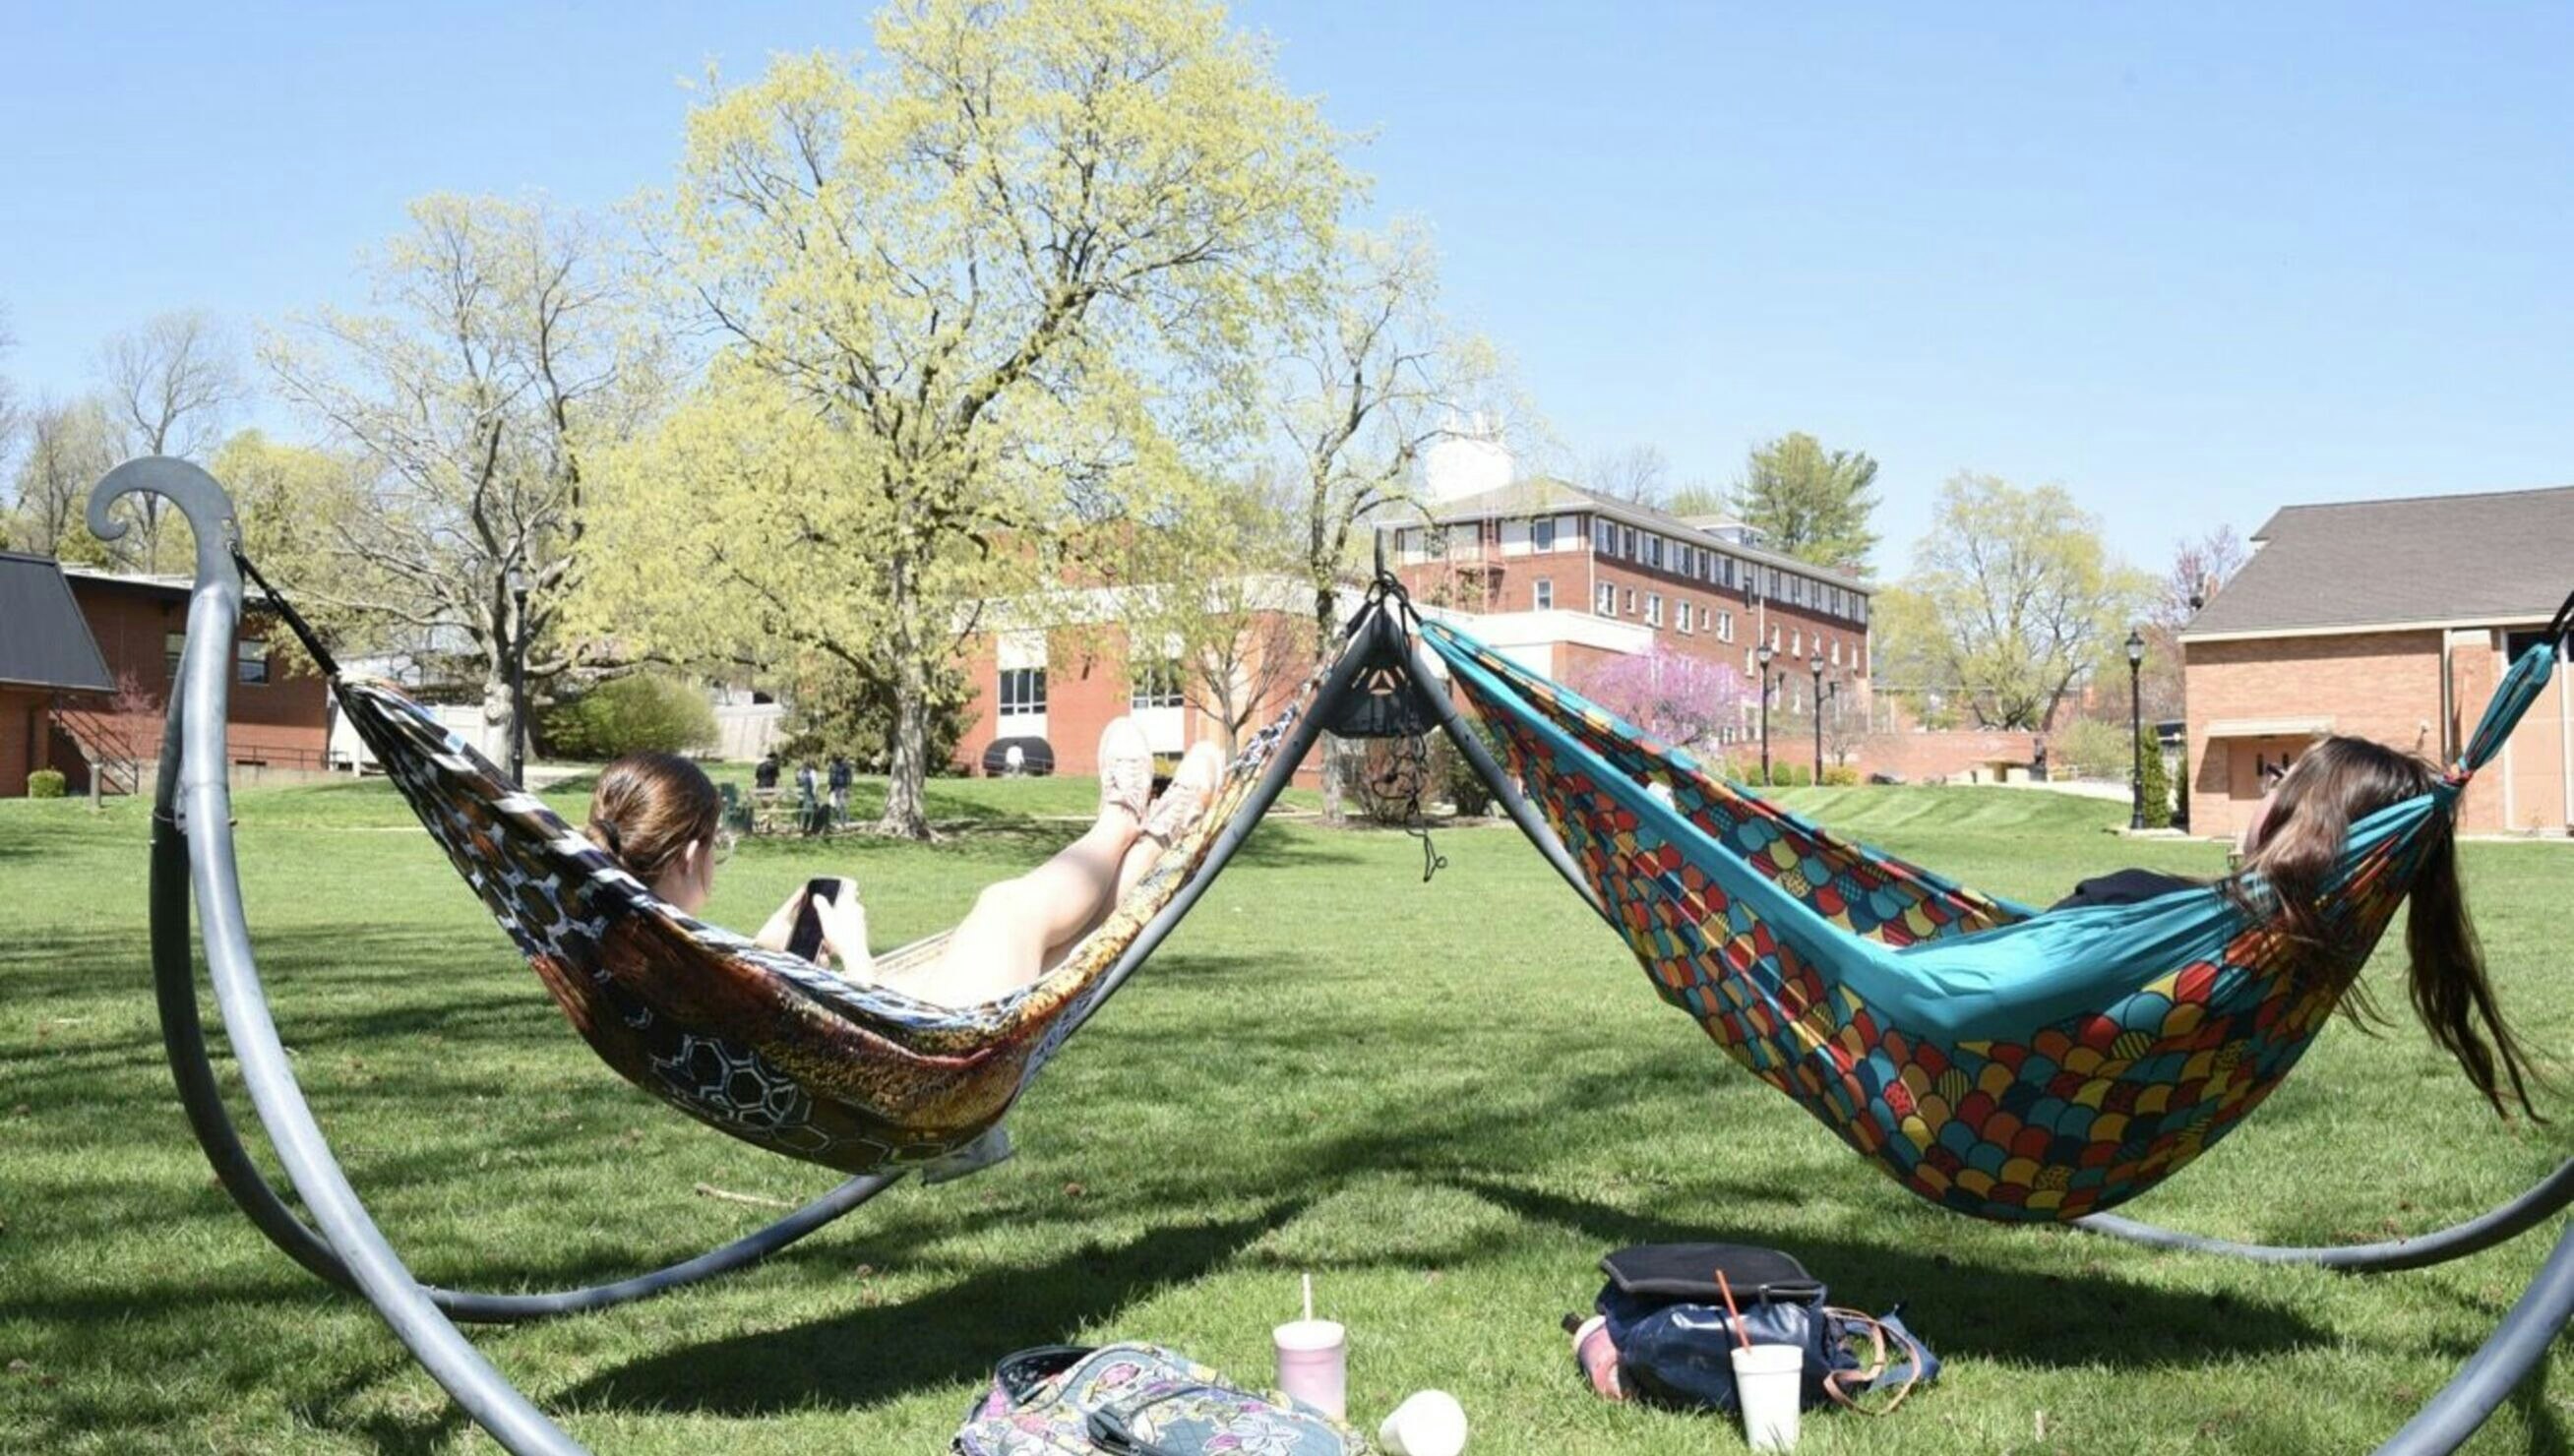 Students relaxing in hammocks outdoors2